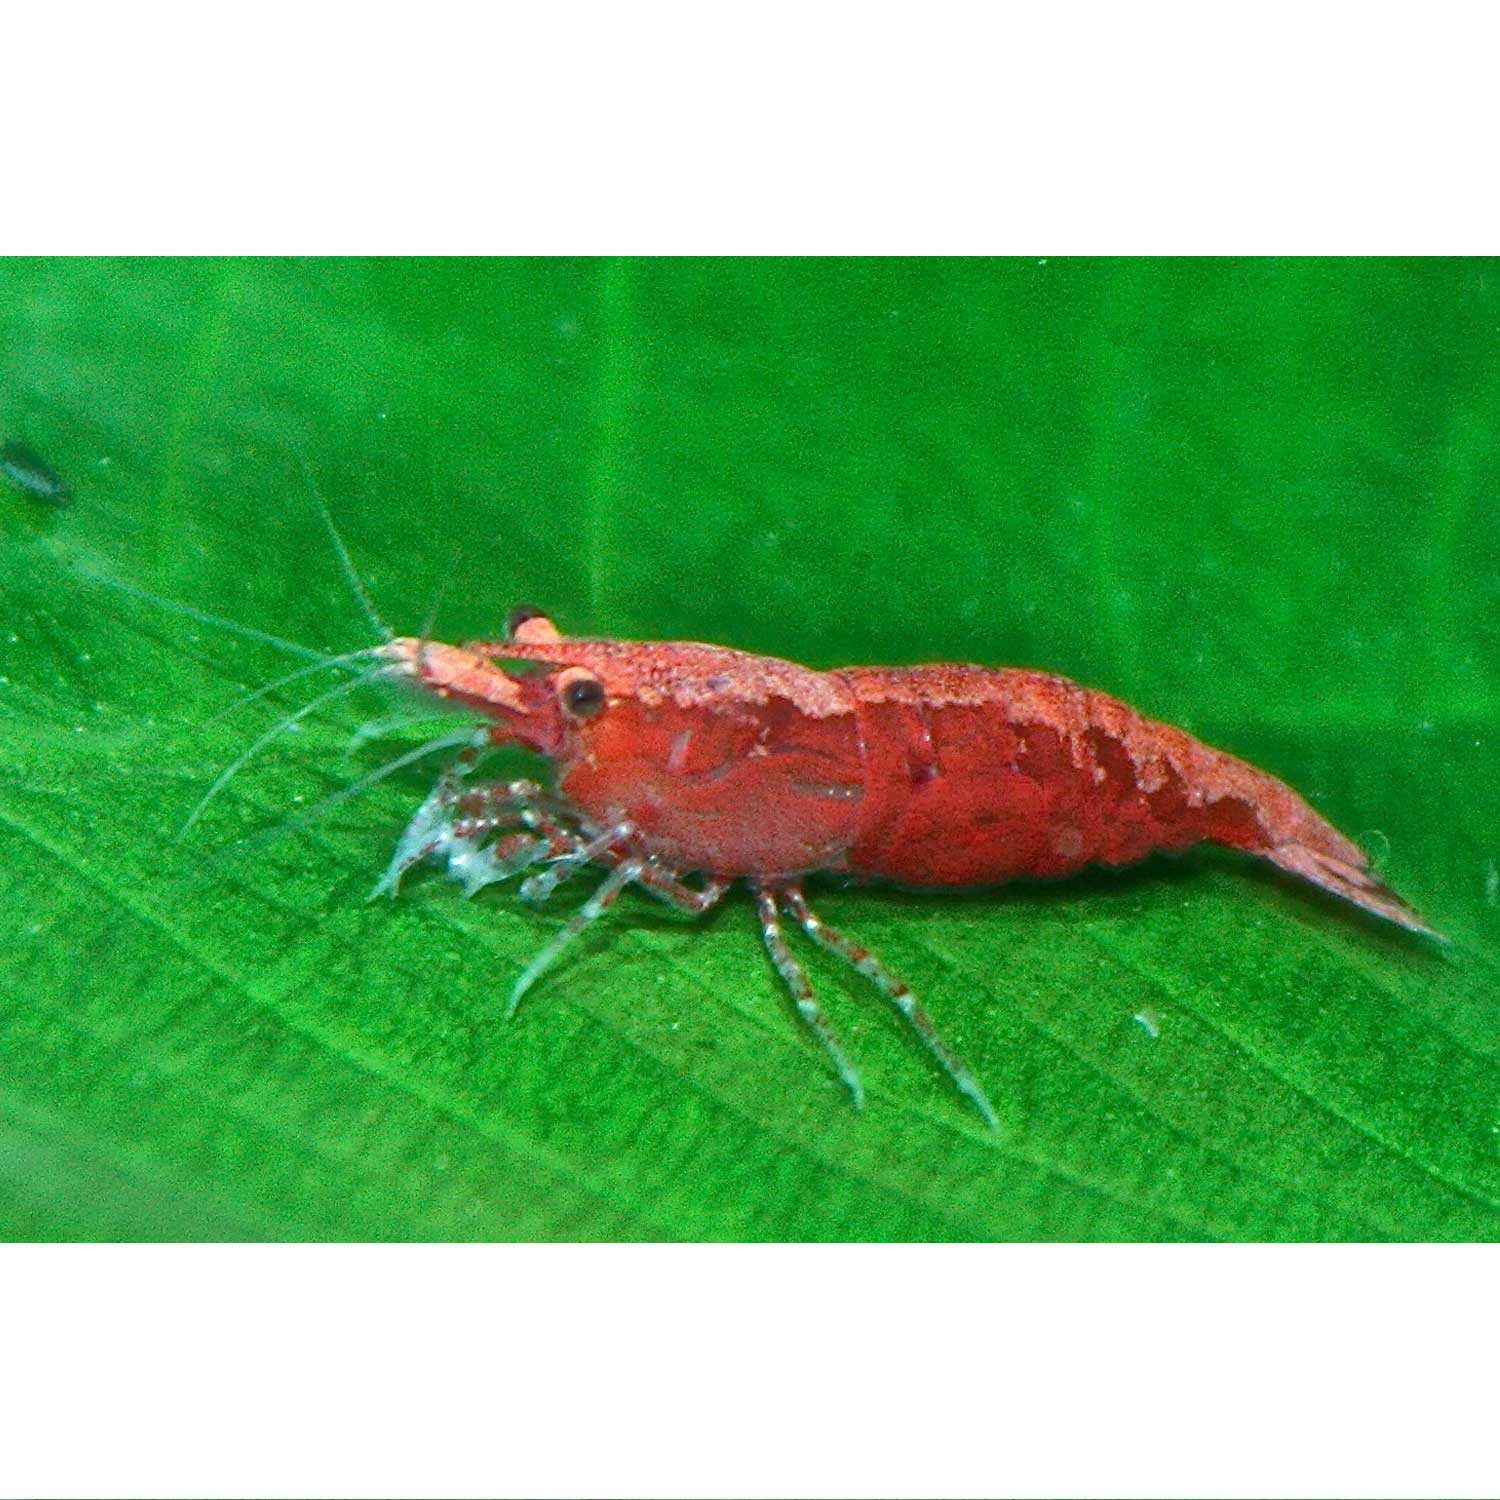 Cherry Shrimp For Sale 0 5 1 S Order Online Petco - how many shrimps do you have to eat roblox code